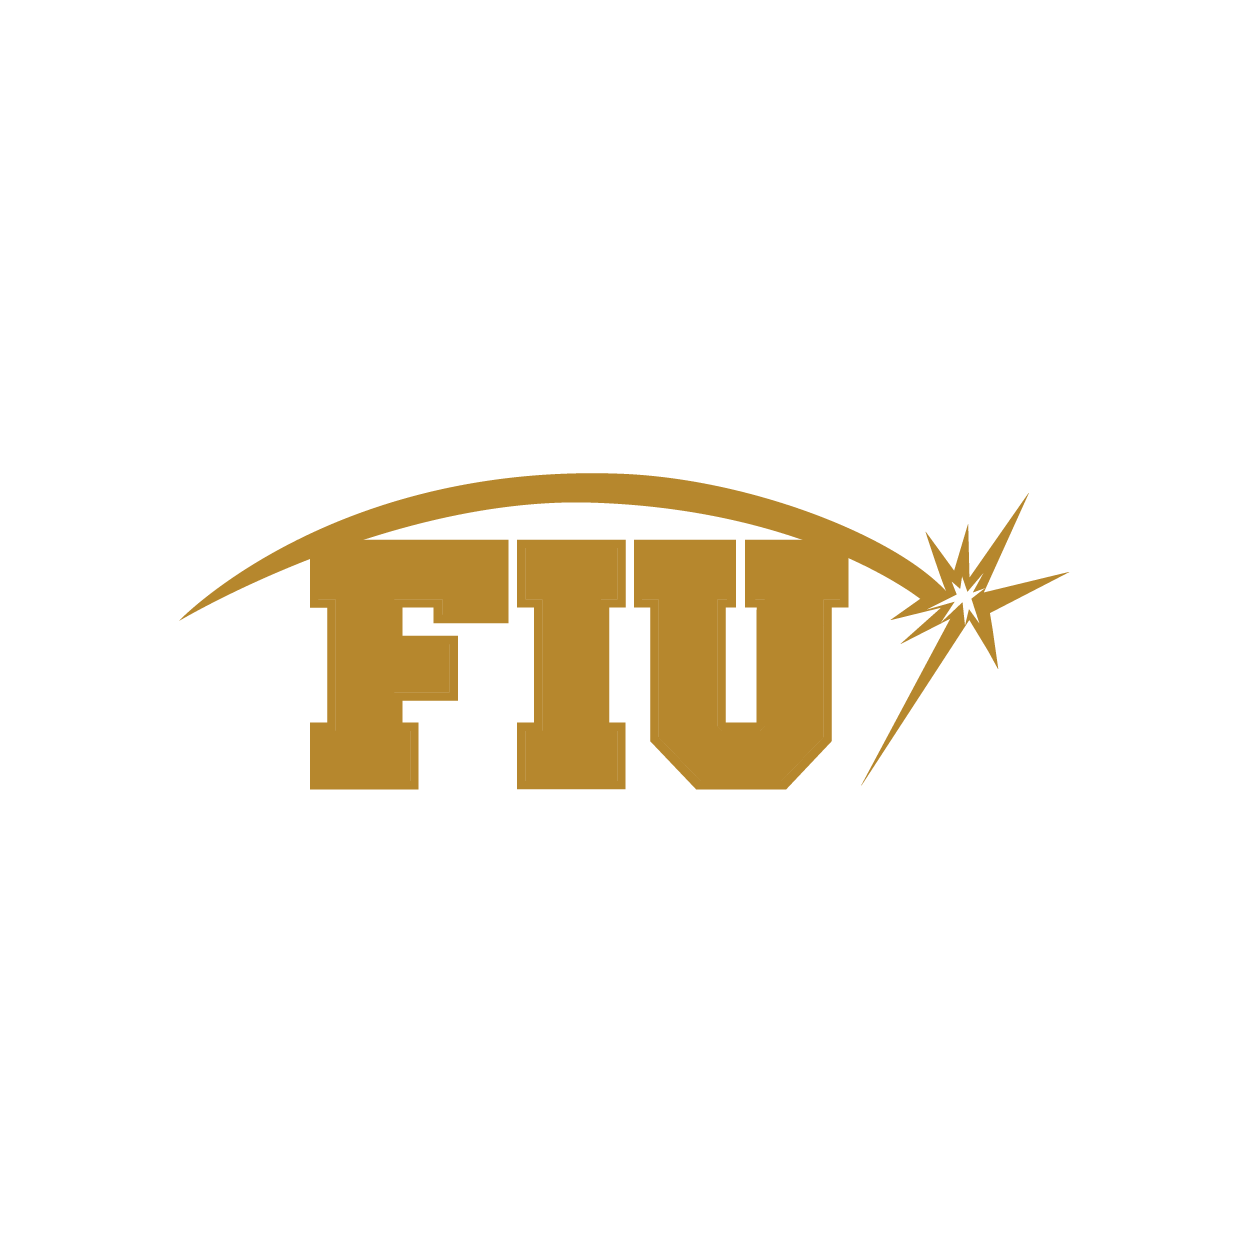 The pin for 2014 was a solid gold FIU with a gold spark over it